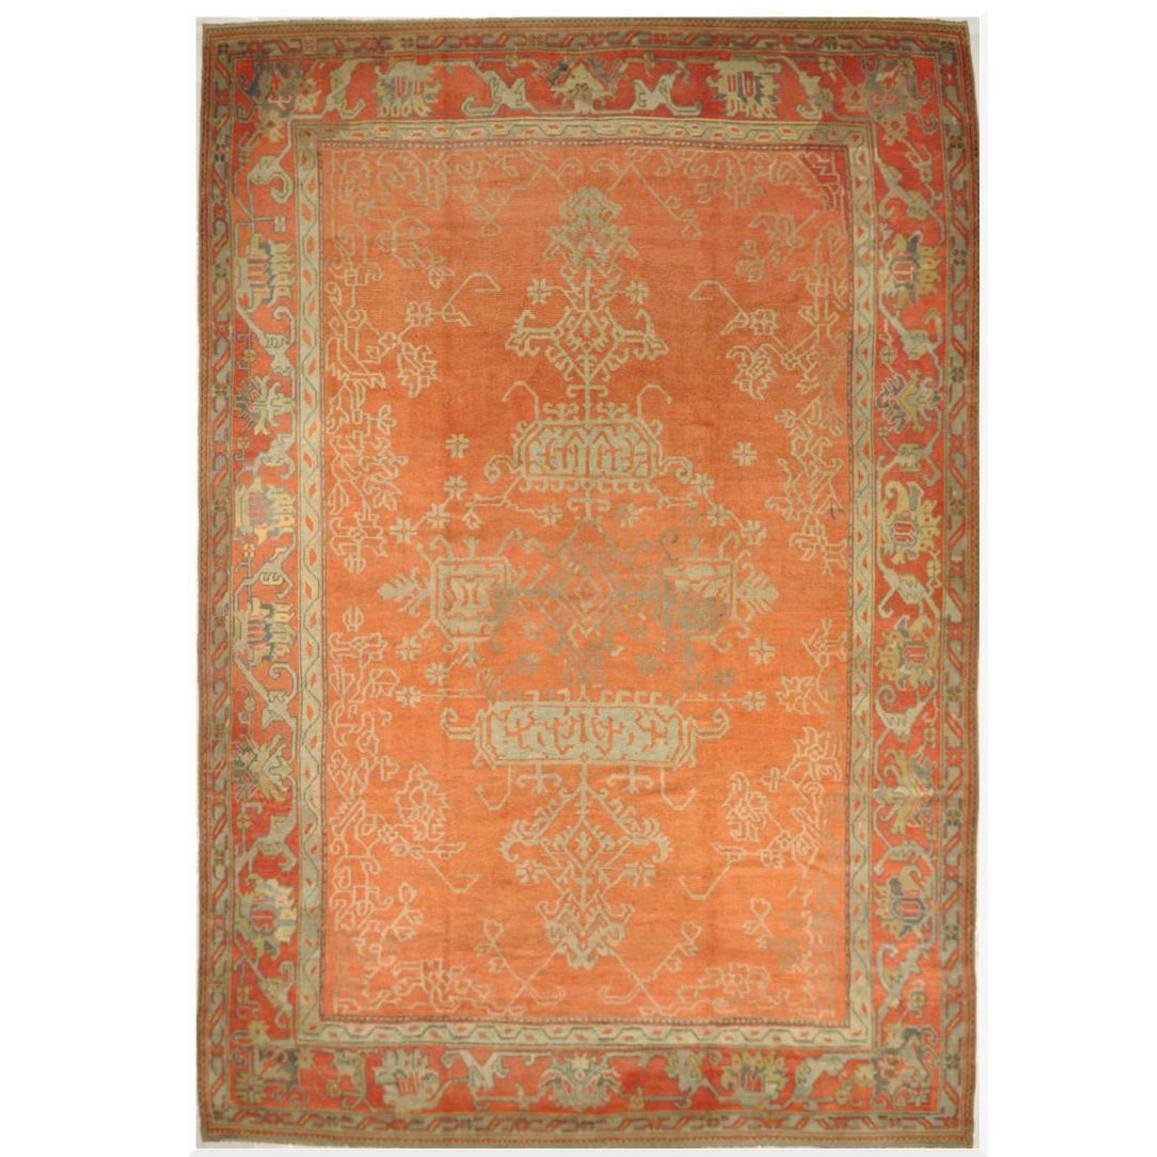 Large Antique Hand-Knotted Wool Coral Red Green Turkish Oushak Rug For Sale